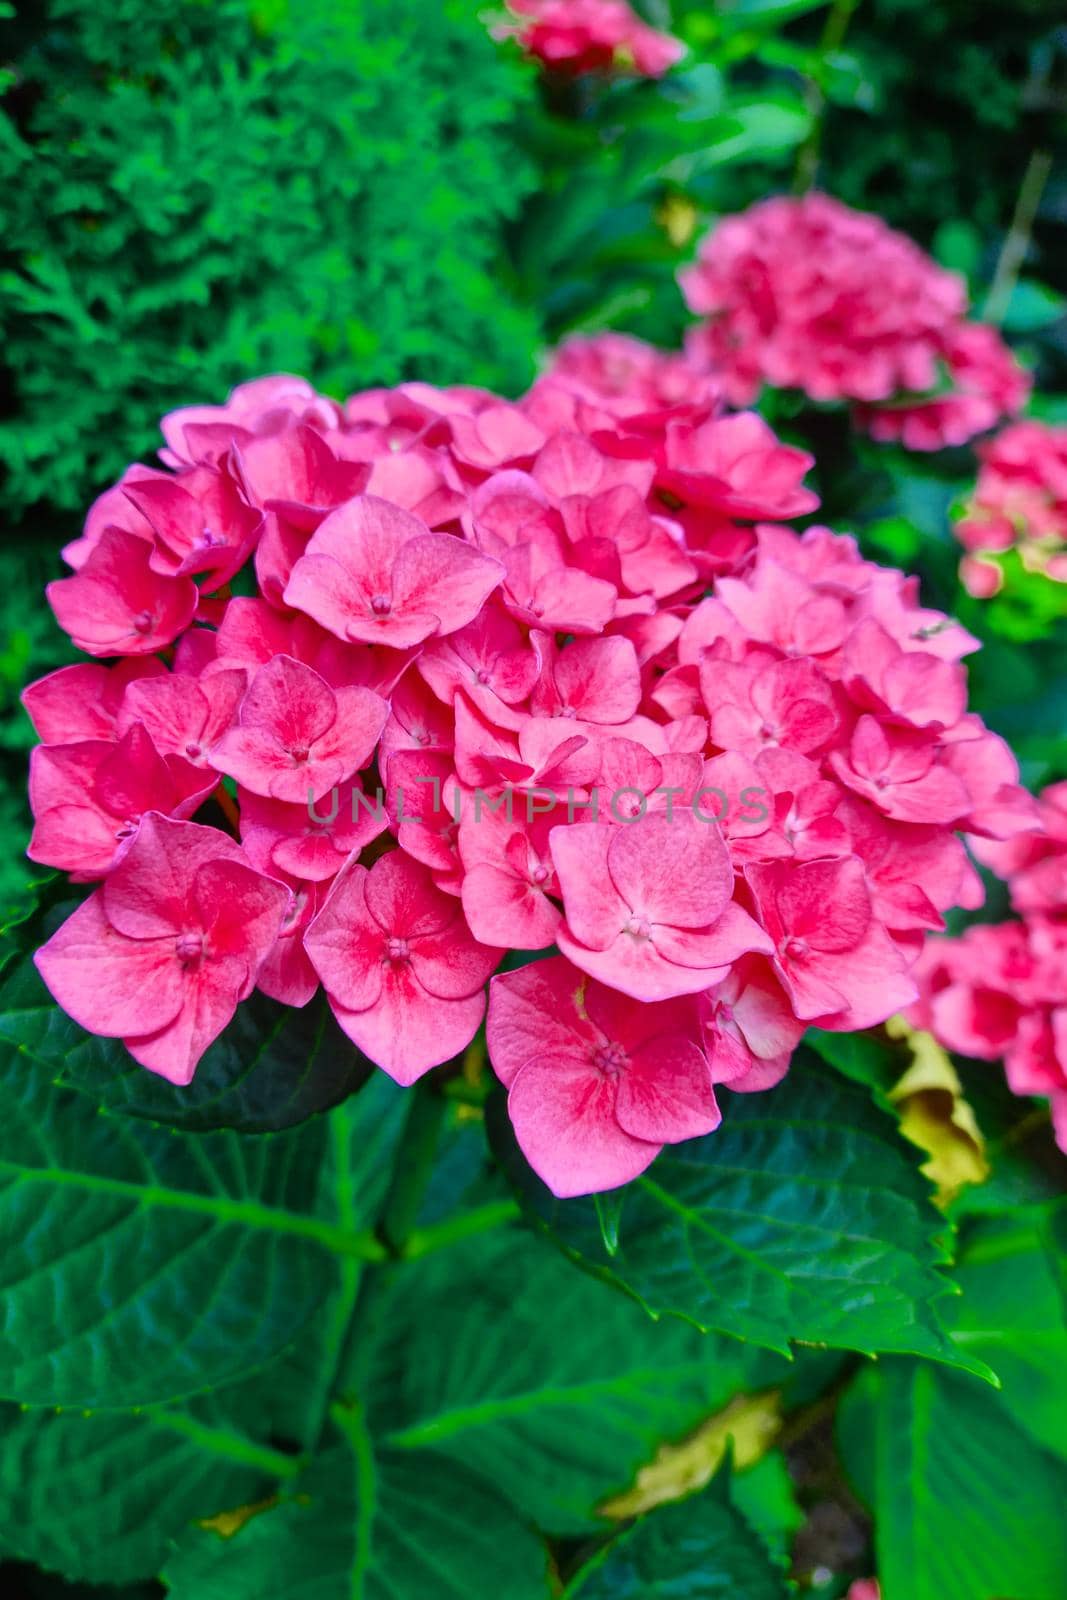 A red flowering branch of hydrangeas in the garden in the spring